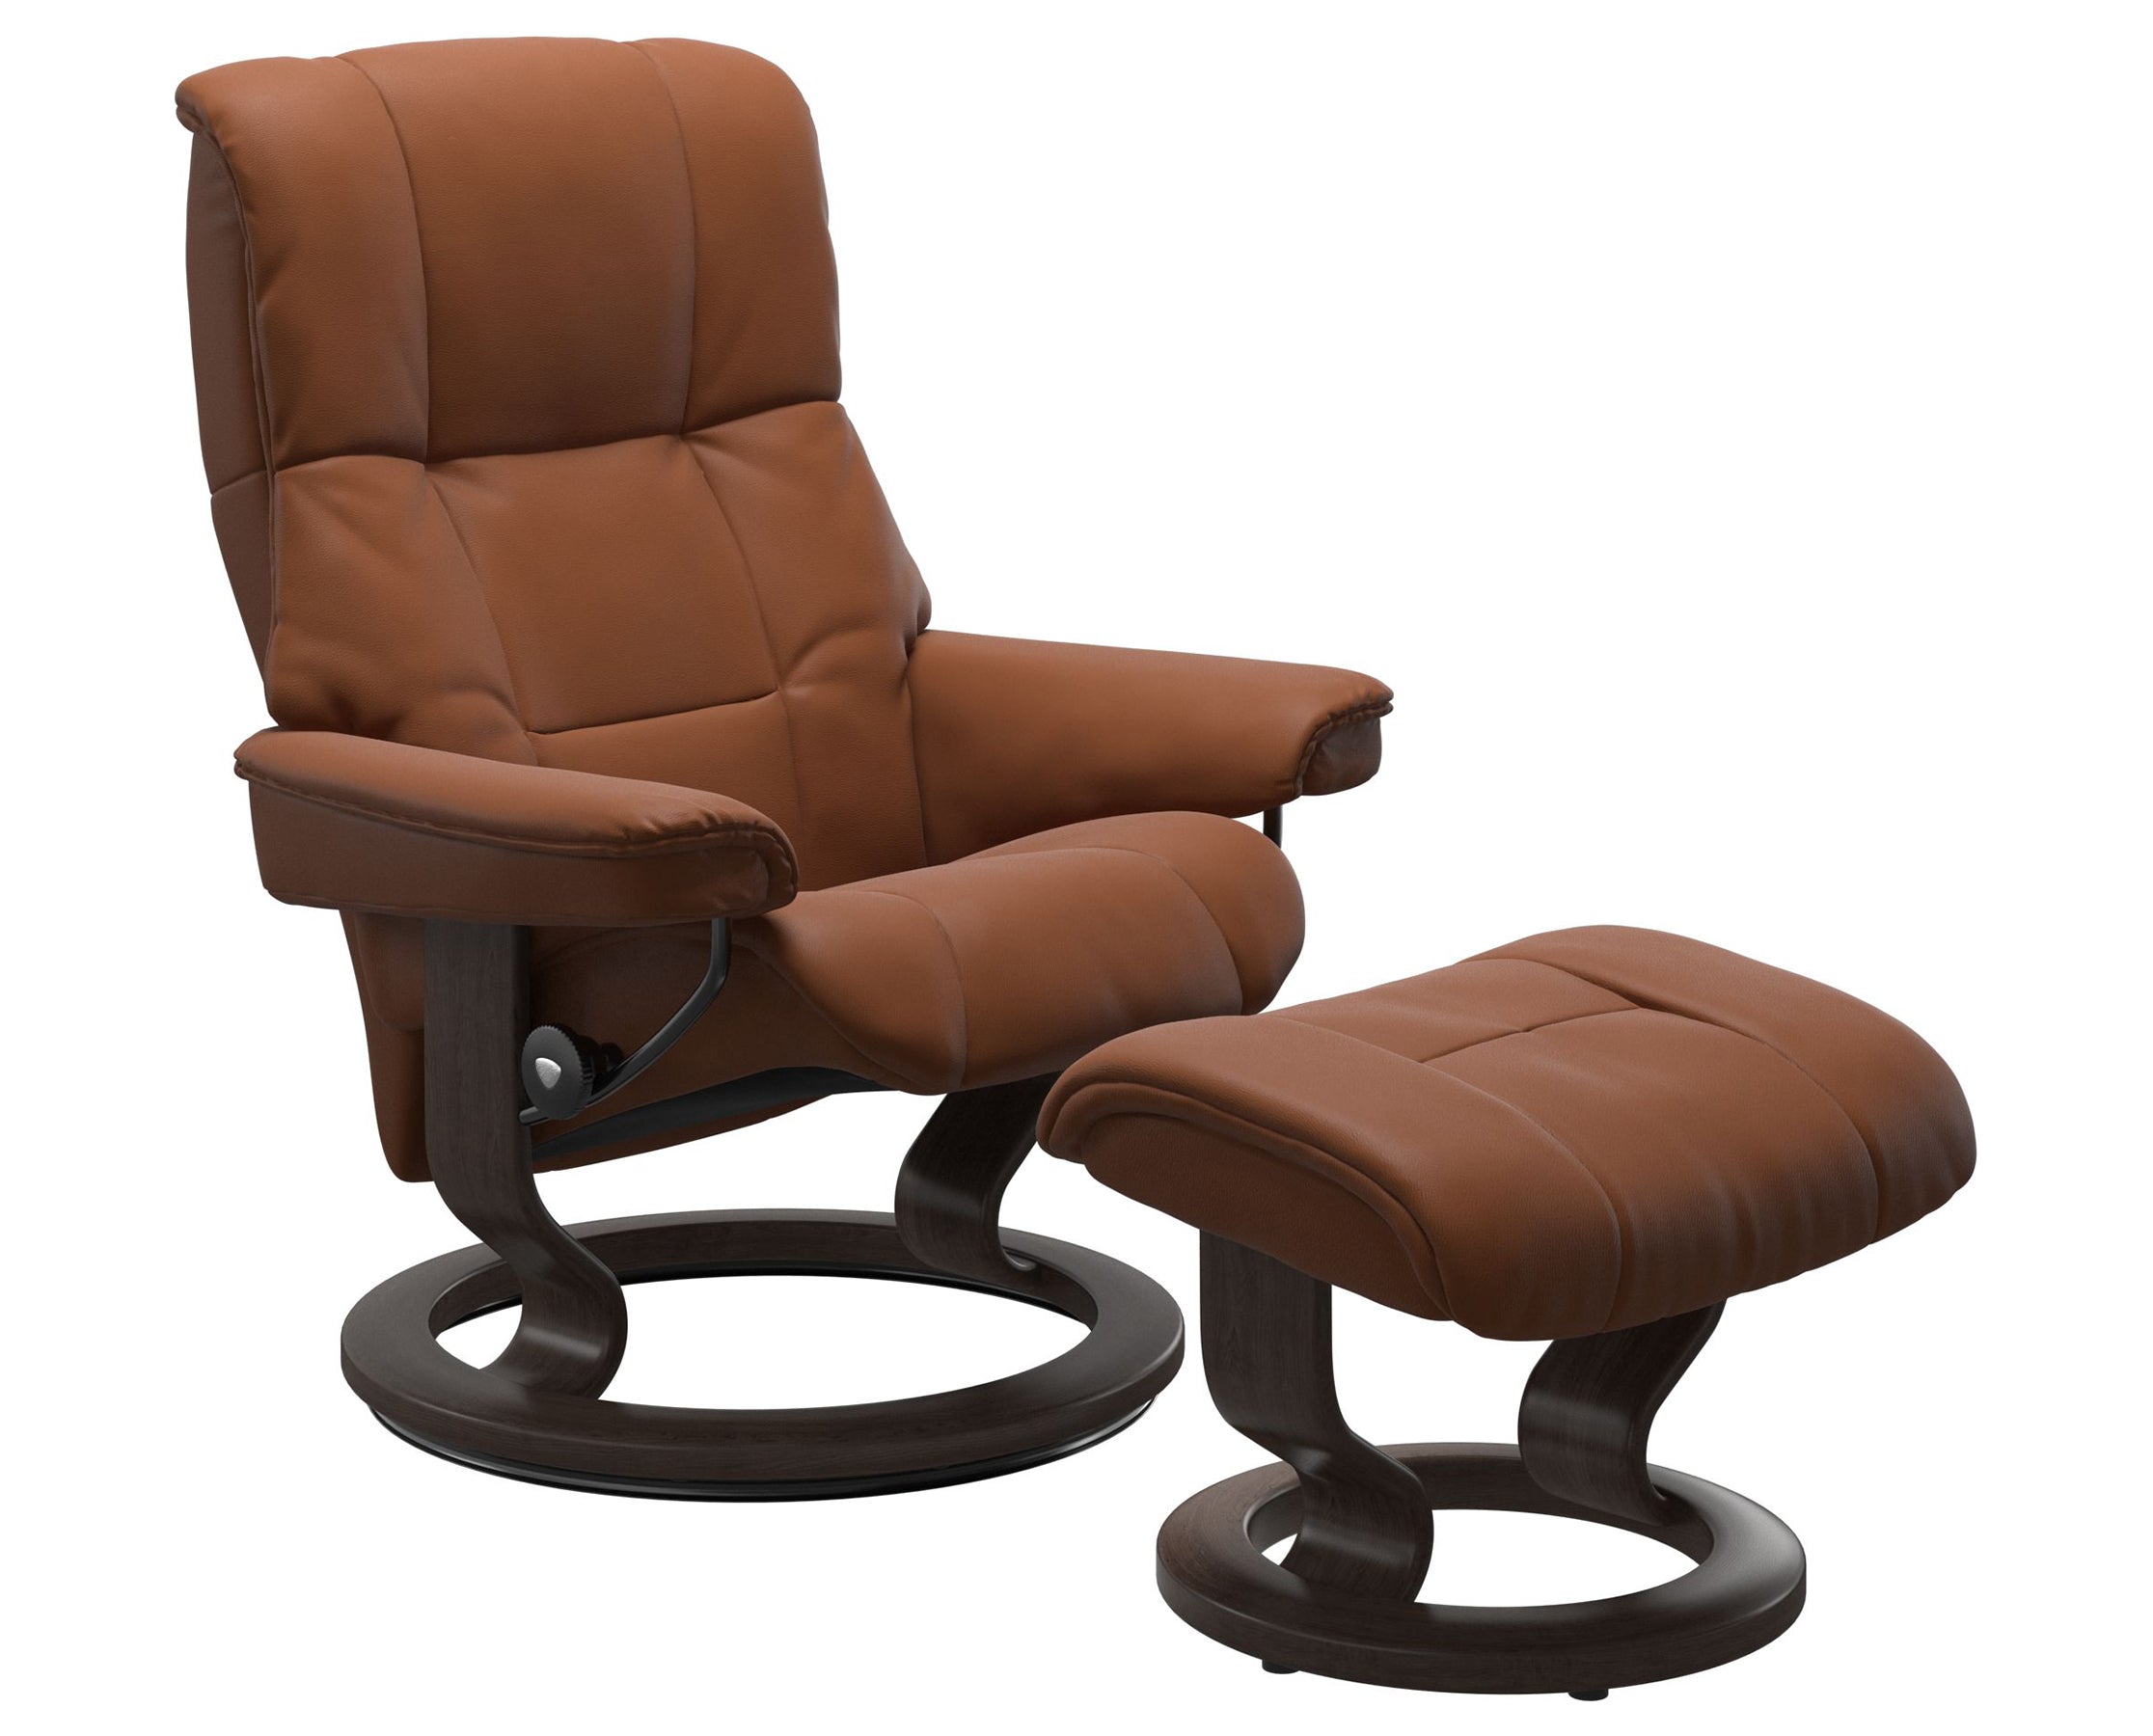 Paloma Leather New Cognac S/M/L and Wenge Base | Stressless Mayfair Classic Recliner | Valley Ridge Furniture